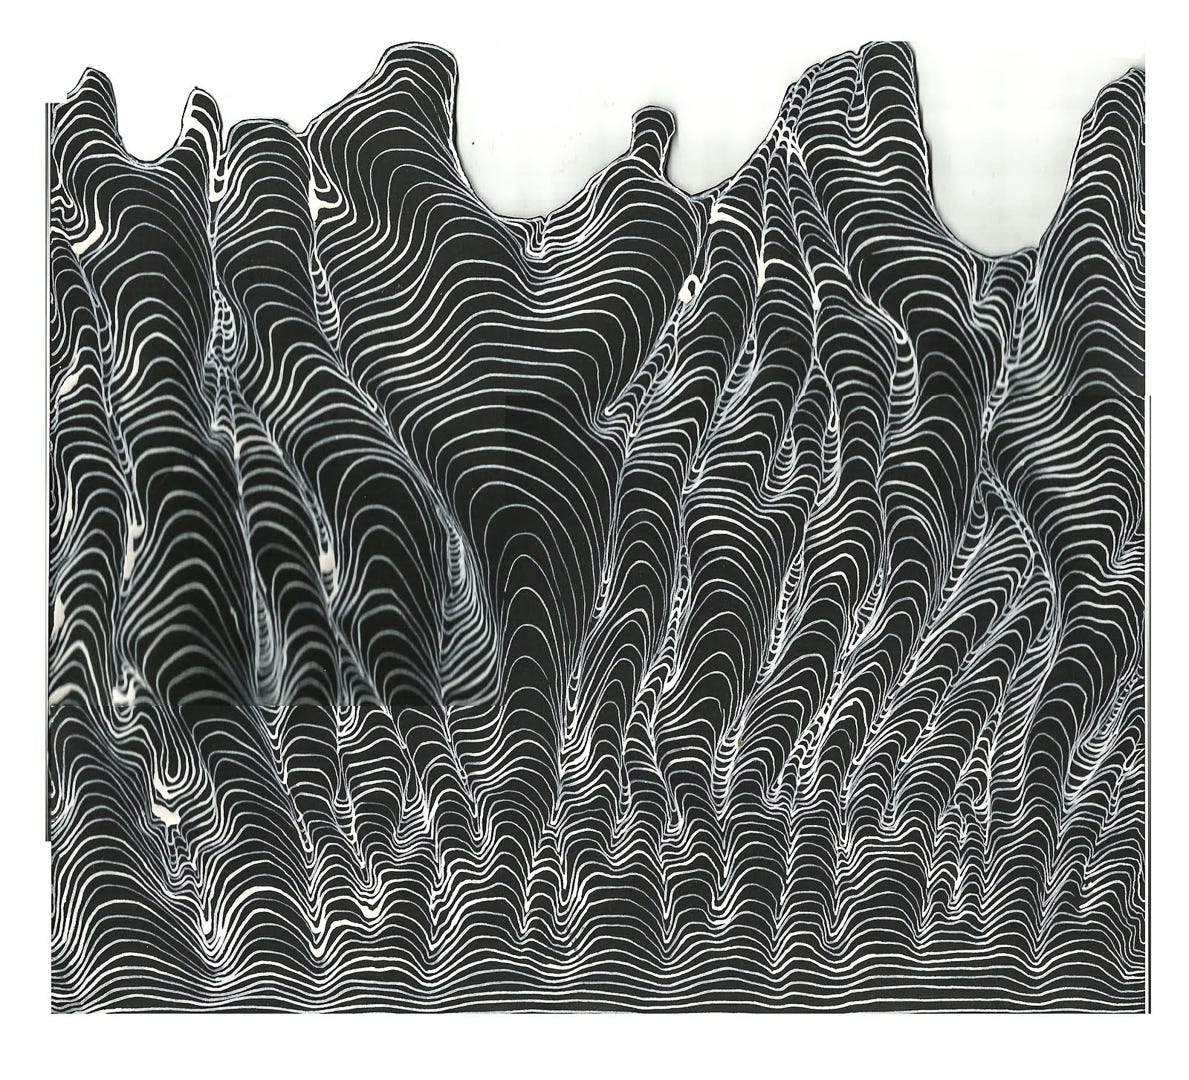 black line drawing of hill like forms